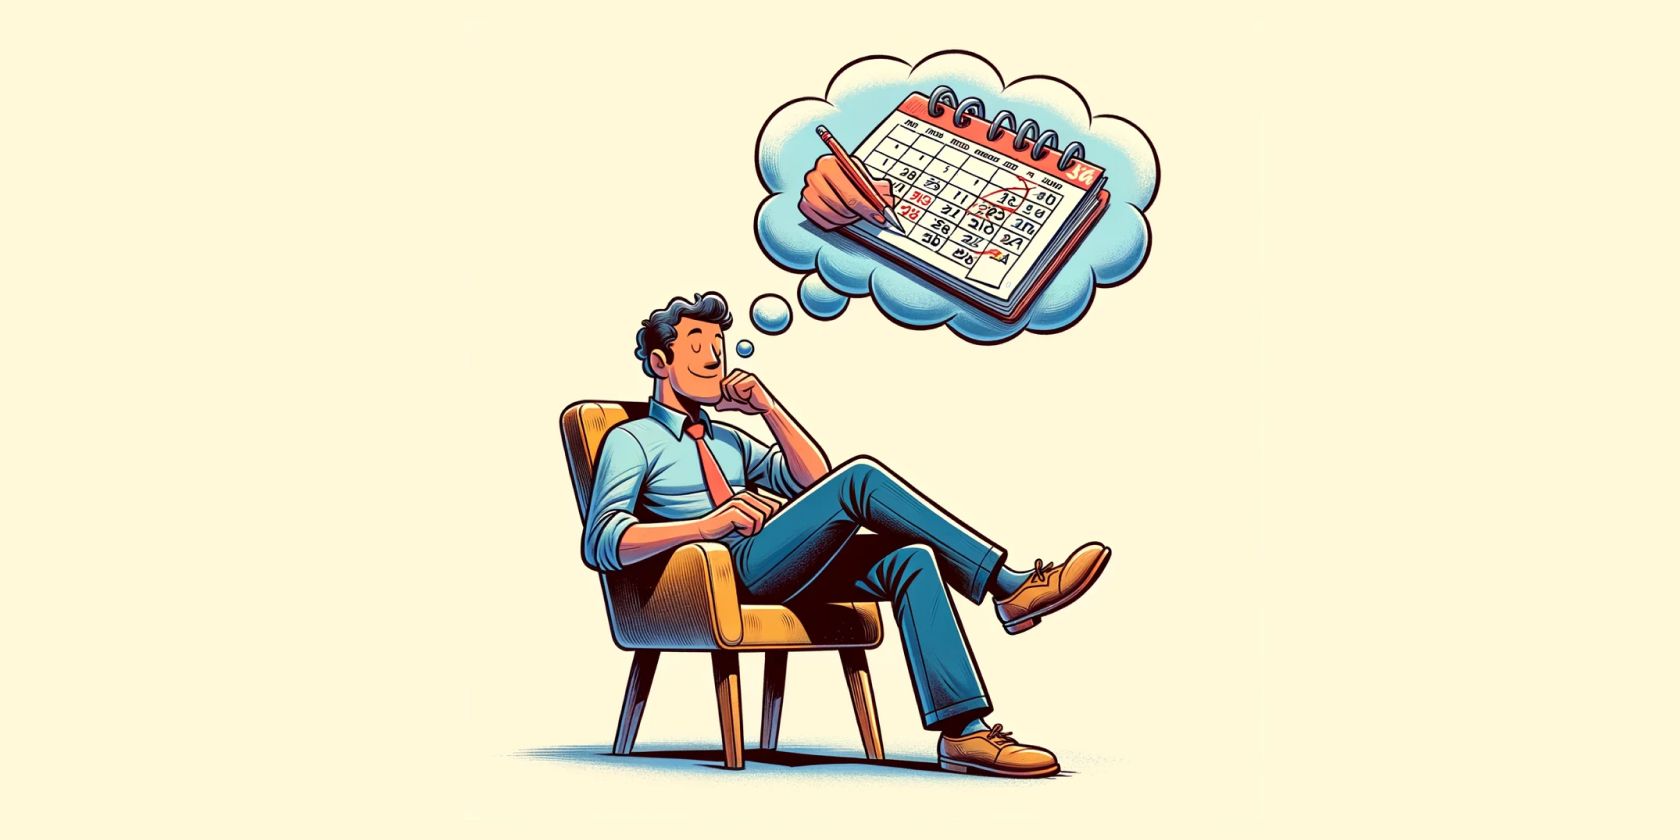 An illustration of a man sitting on a chair, with a thought cloud above his head, containing a calendar.